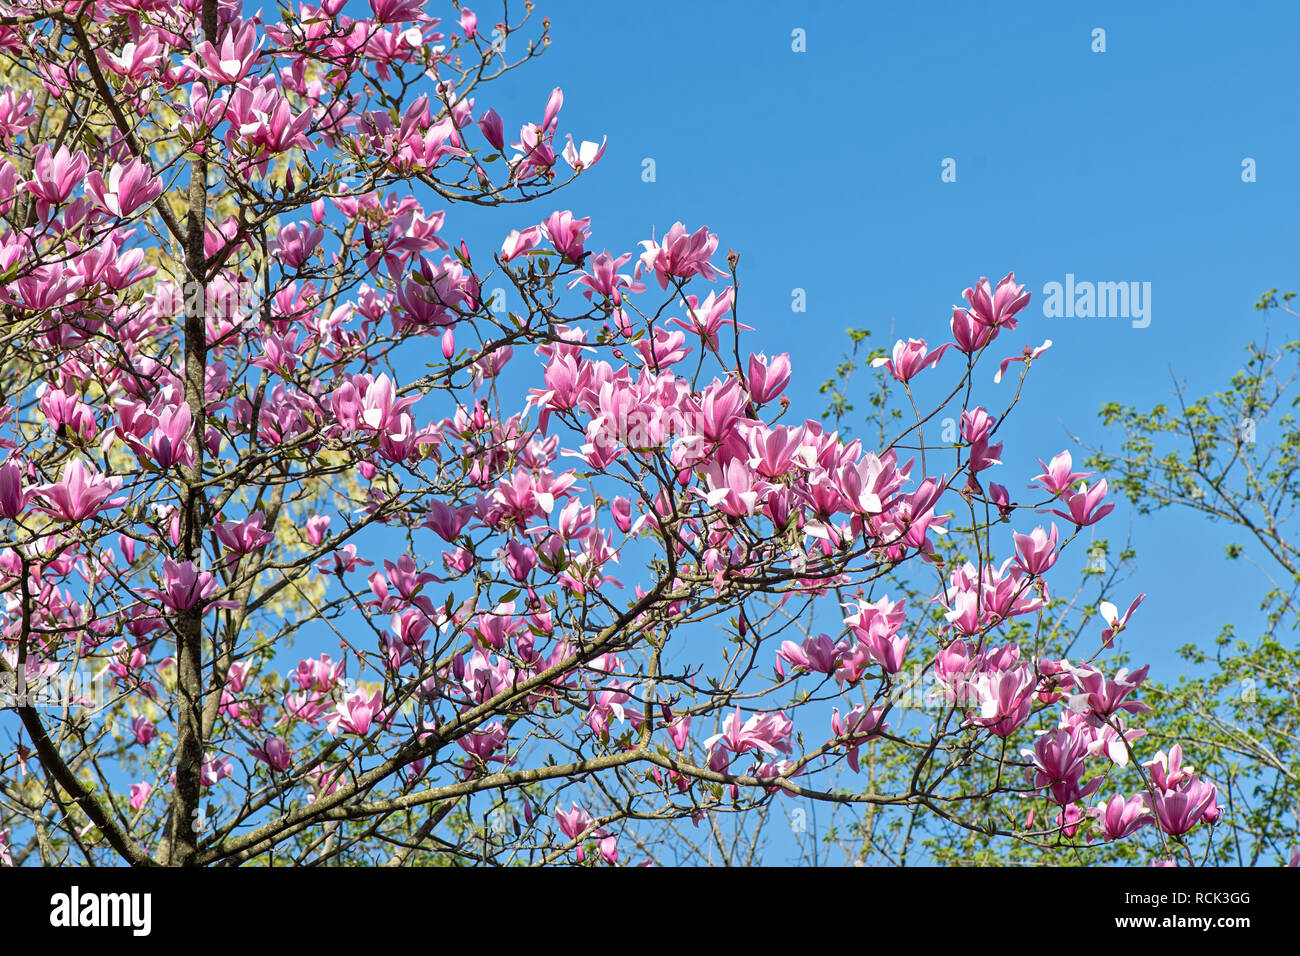 The beautiful vibrant pink flowers of the spring flowering Magnolia 'Spectrum' against a bright blue sky Stock Photo